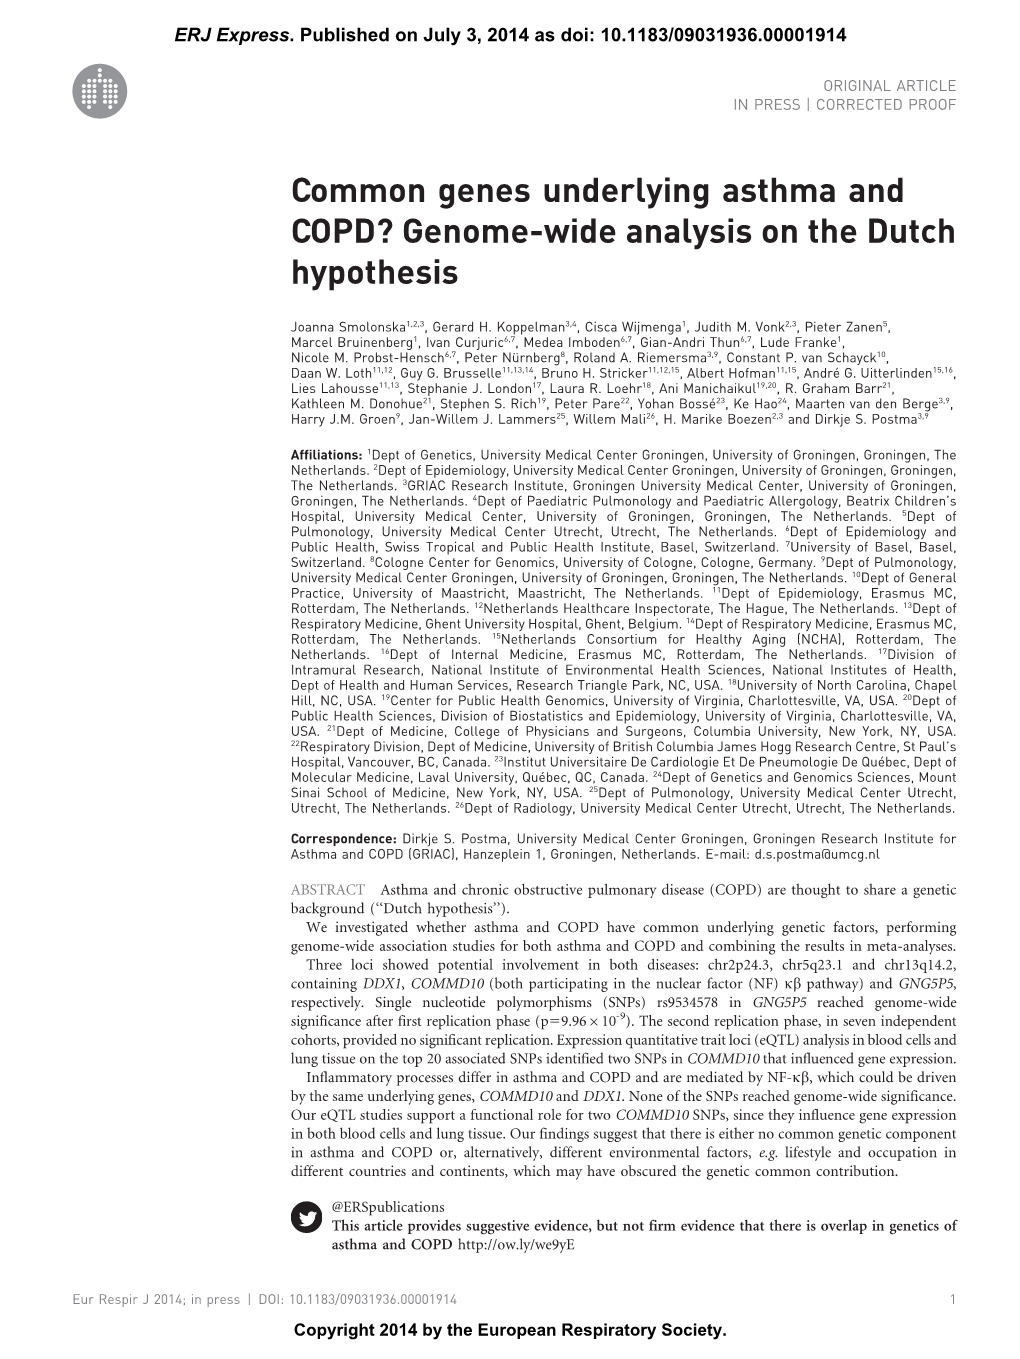 Common Genes Underlying Asthma and COPD? Genome-Wide Analysis on the Dutch Hypothesis